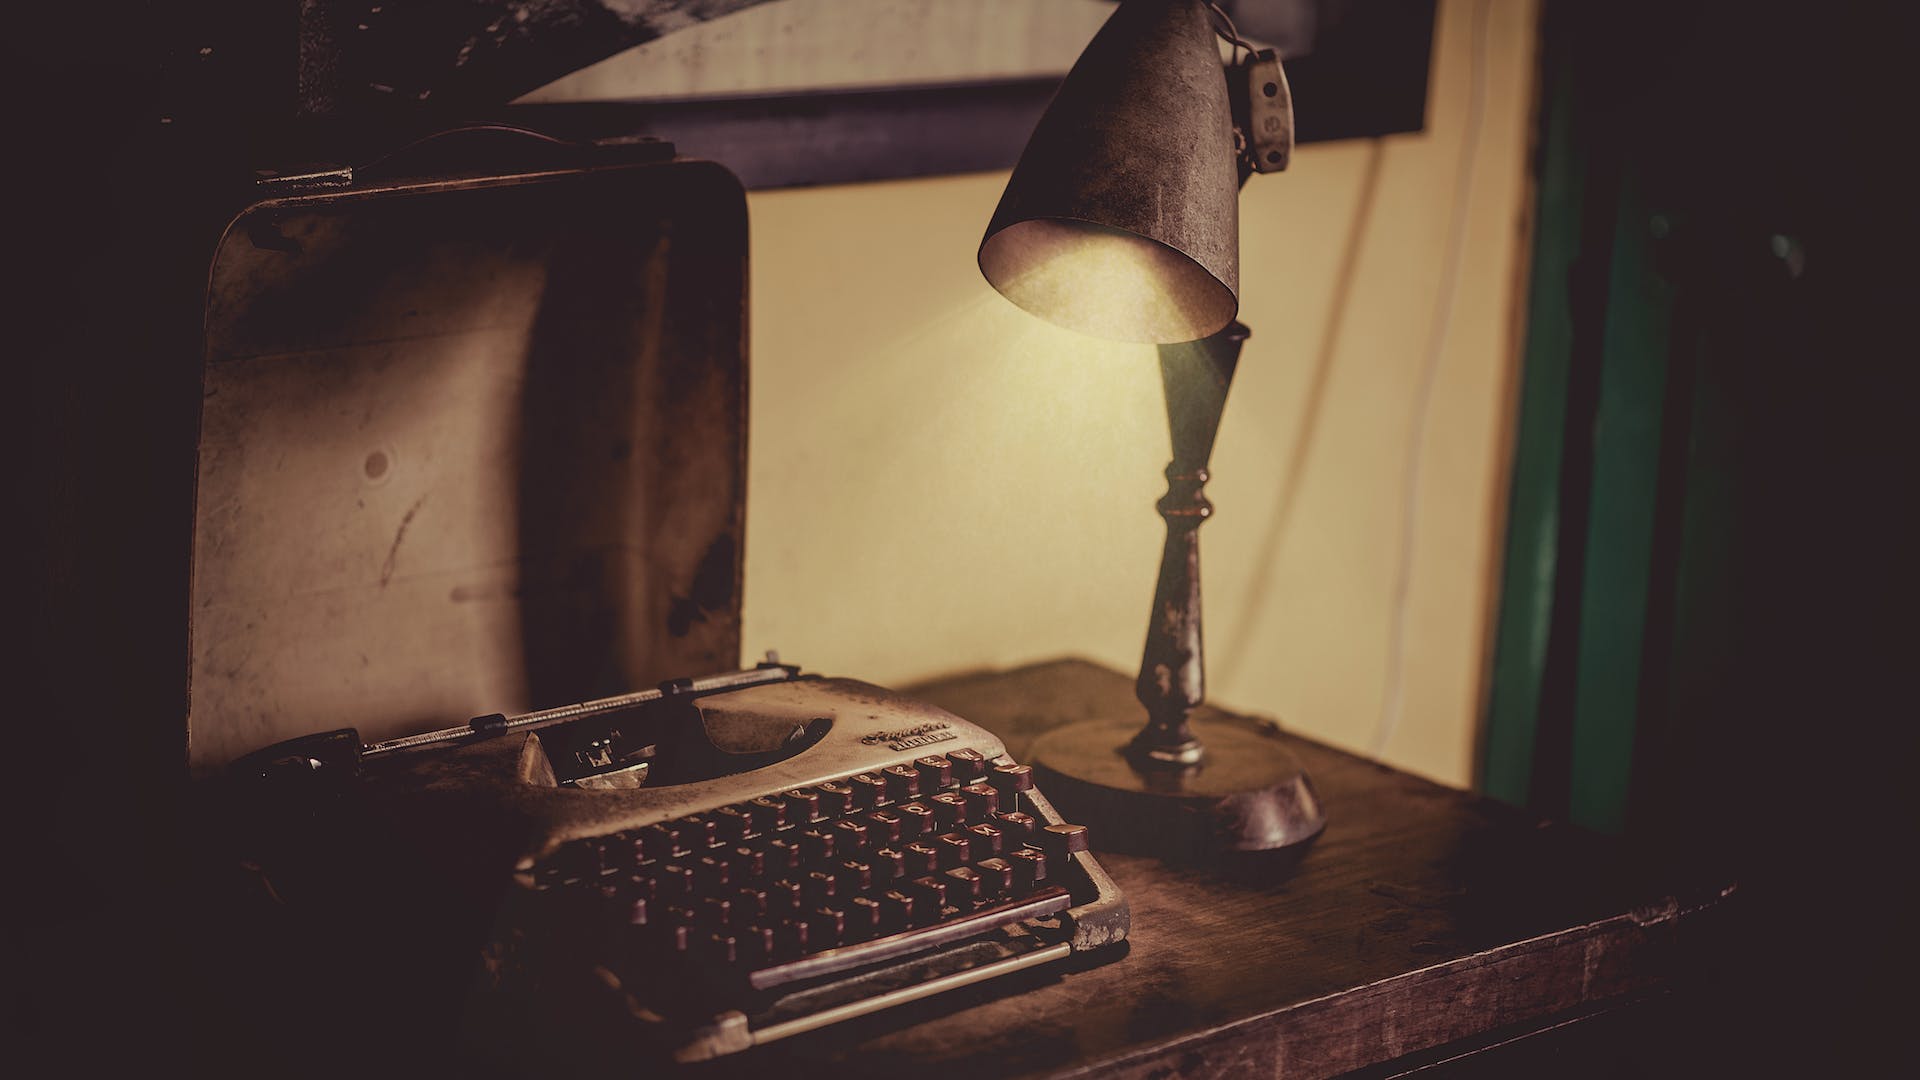 Vintage typewriter sits on a wooden desk, illuminated by the warm glow of a classic desk lamp, symbolizing content's true power in authentic storytelling.